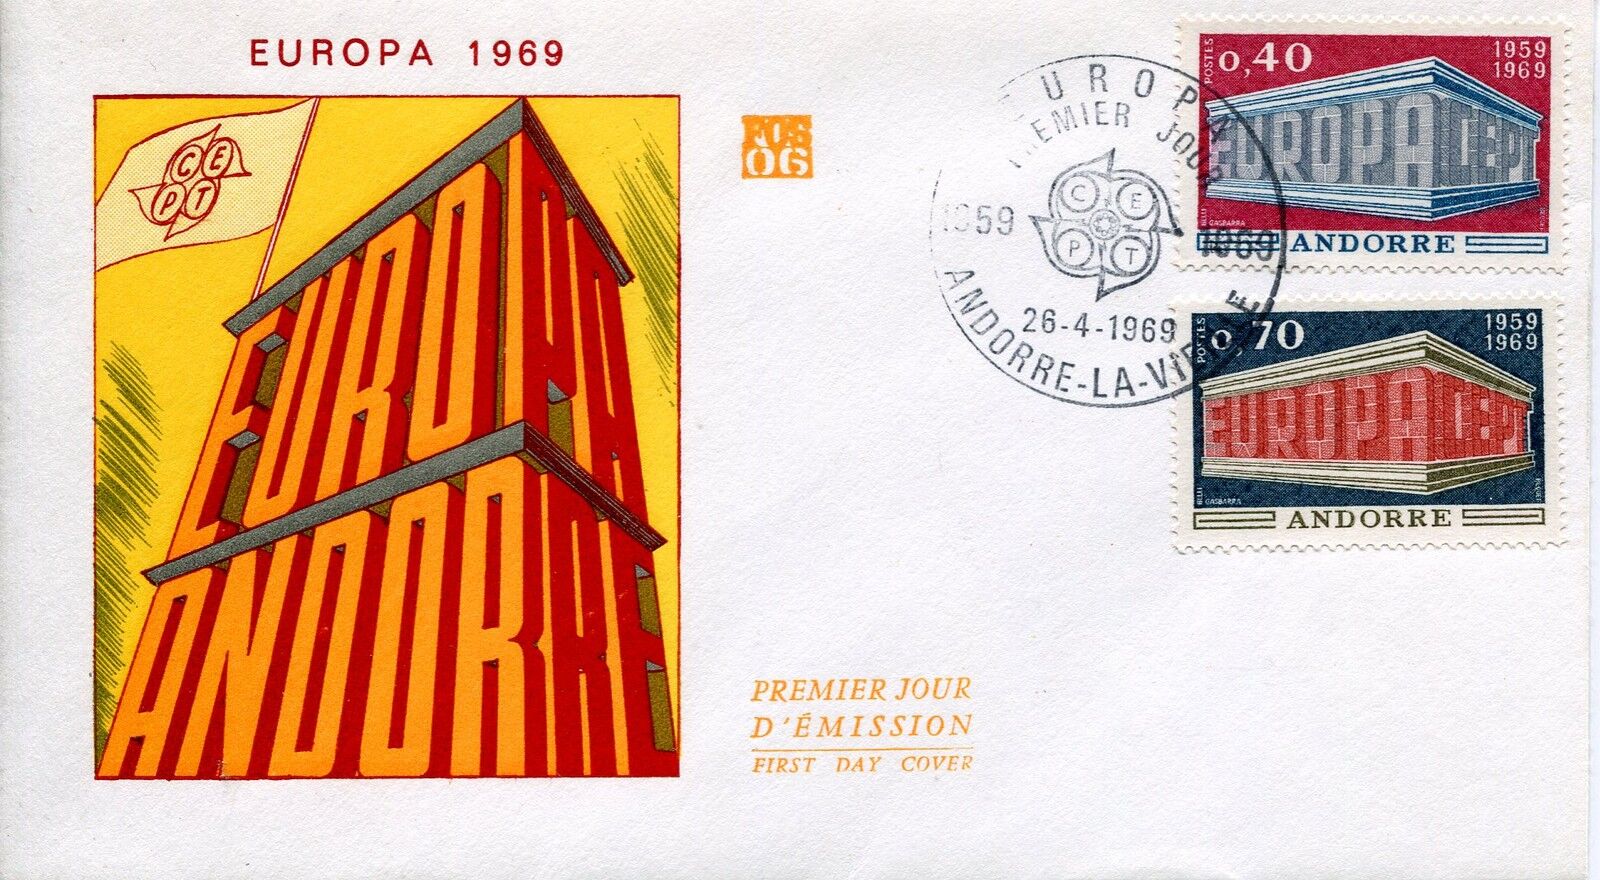 FDC PREMIER JOUR ANDORRE 1969 TIMBRE N 194 195 EUROPA 400790942194